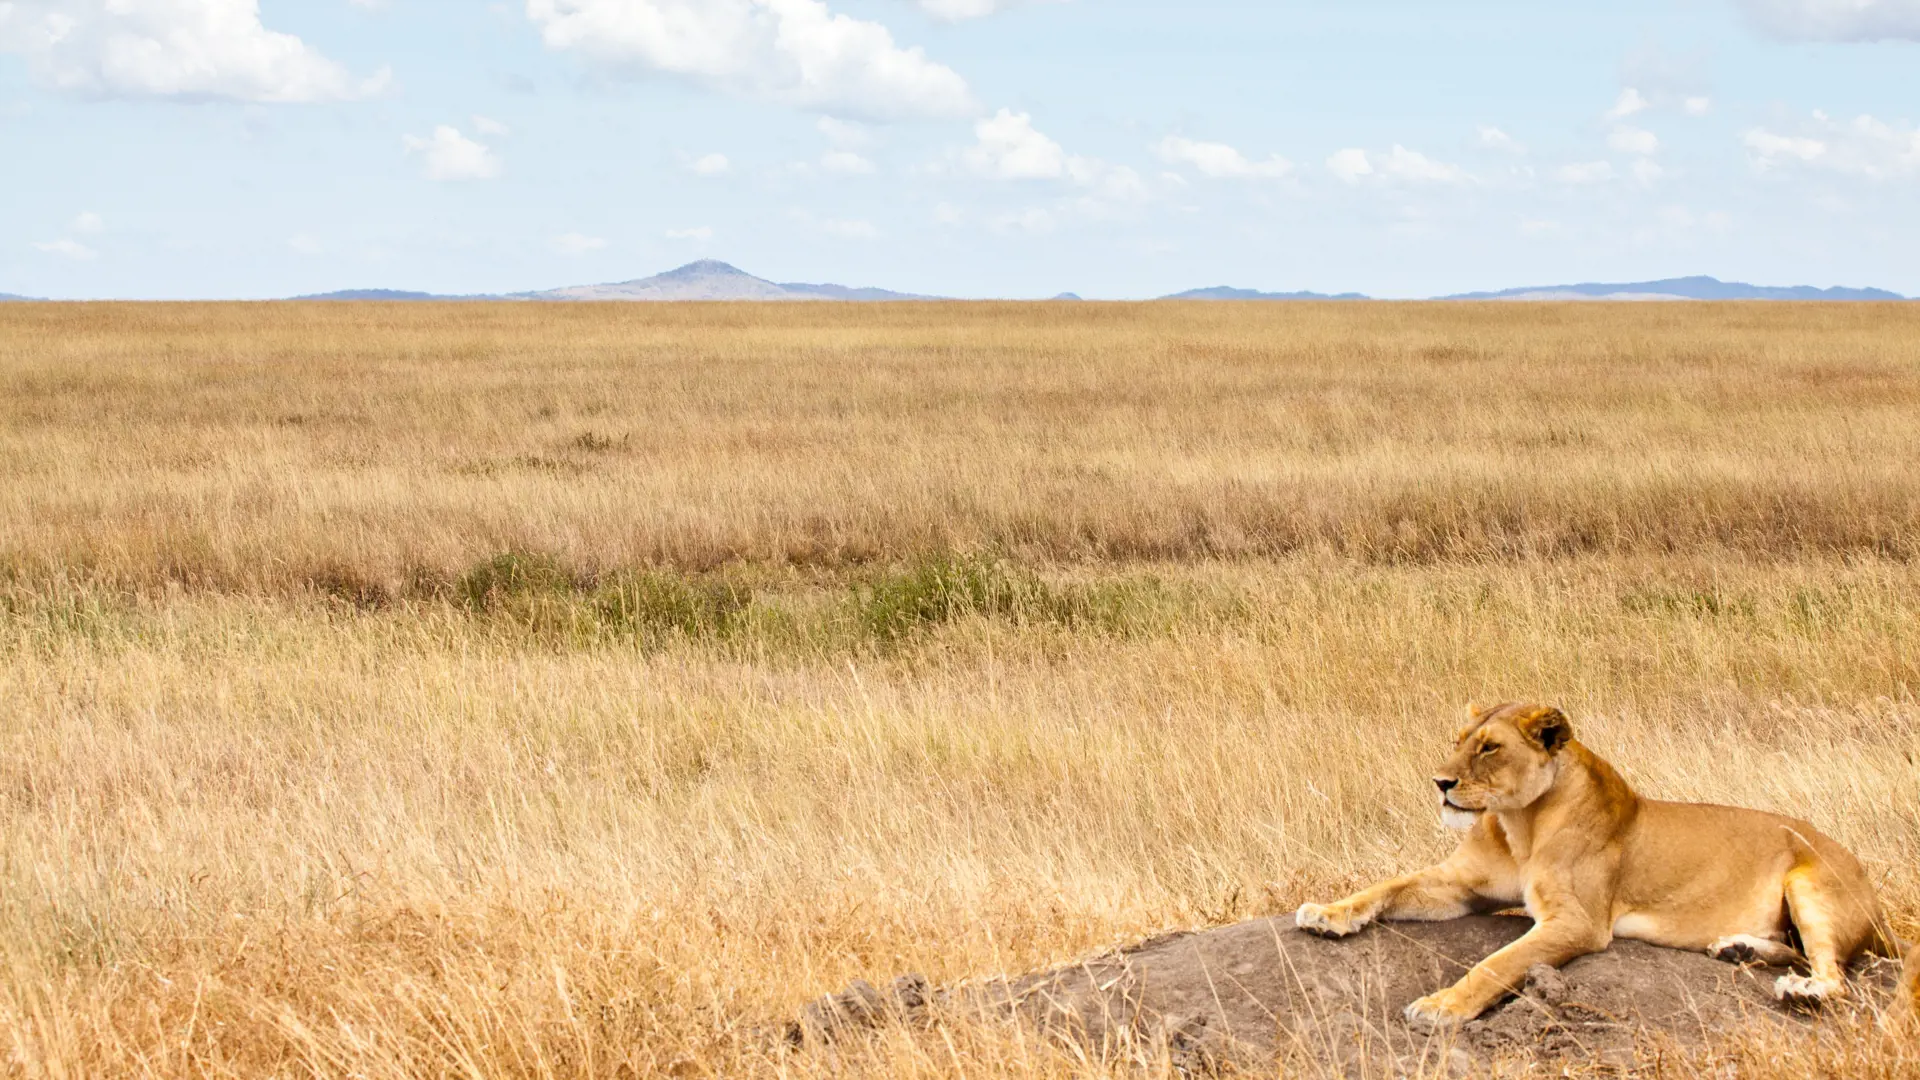 shutterstock_114791017 A lioness scans the Savannah for her next meal. Serengeti National Park, Tanzania.jpg